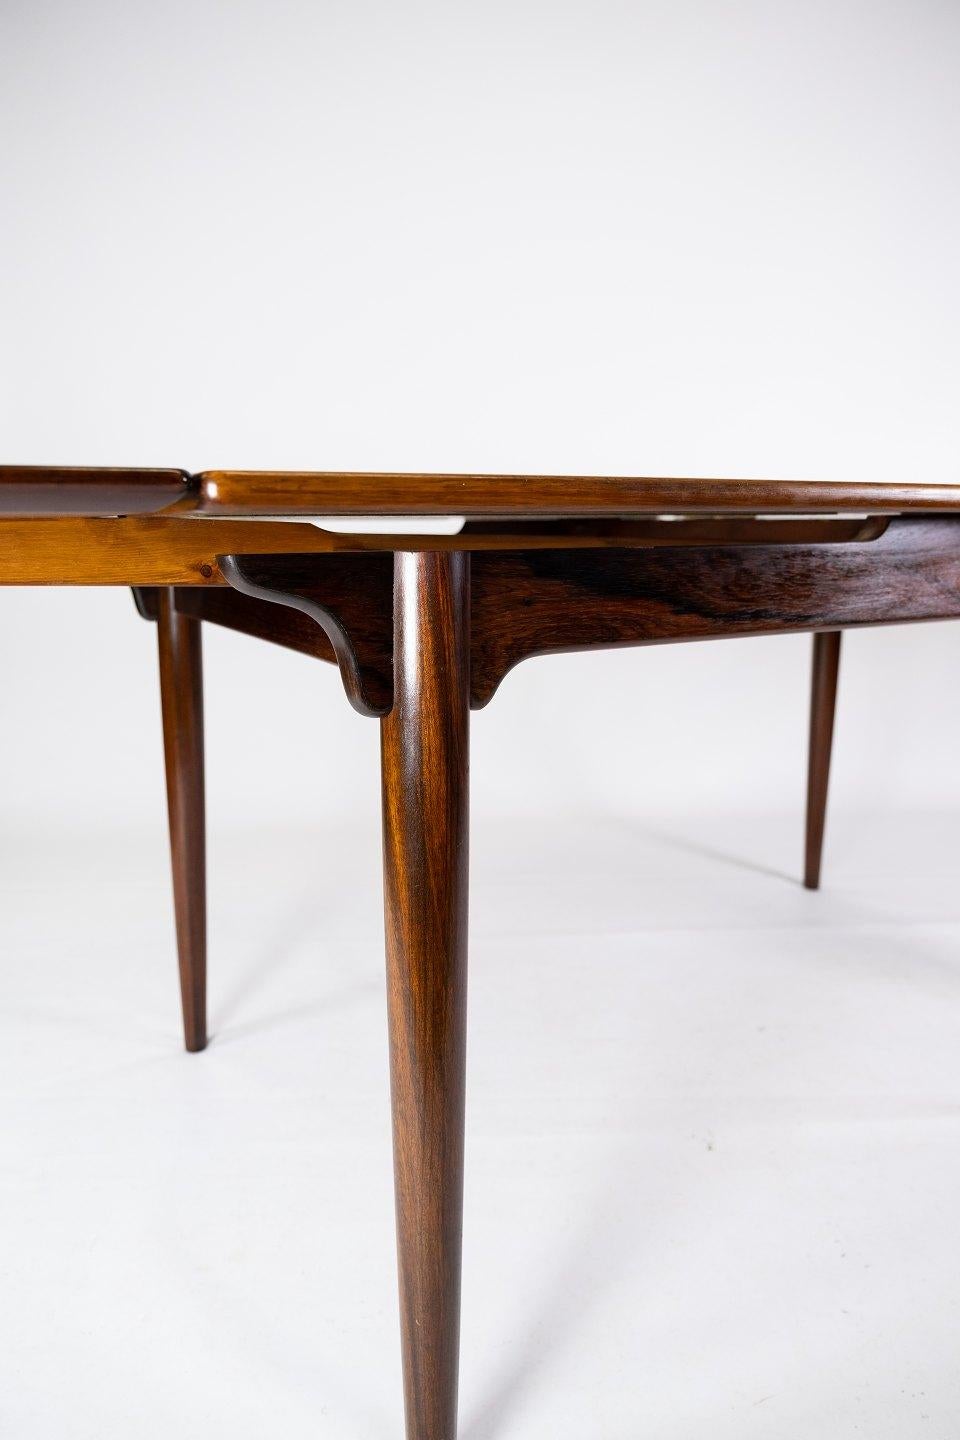 This rosewood dining table, designed by Arne Vodder in the 1960s, is a beautiful example of Danish furniture art from the mid-20th century. The rosewood gives the table a warm and natural glow, while the Dutch pull-out adds practical